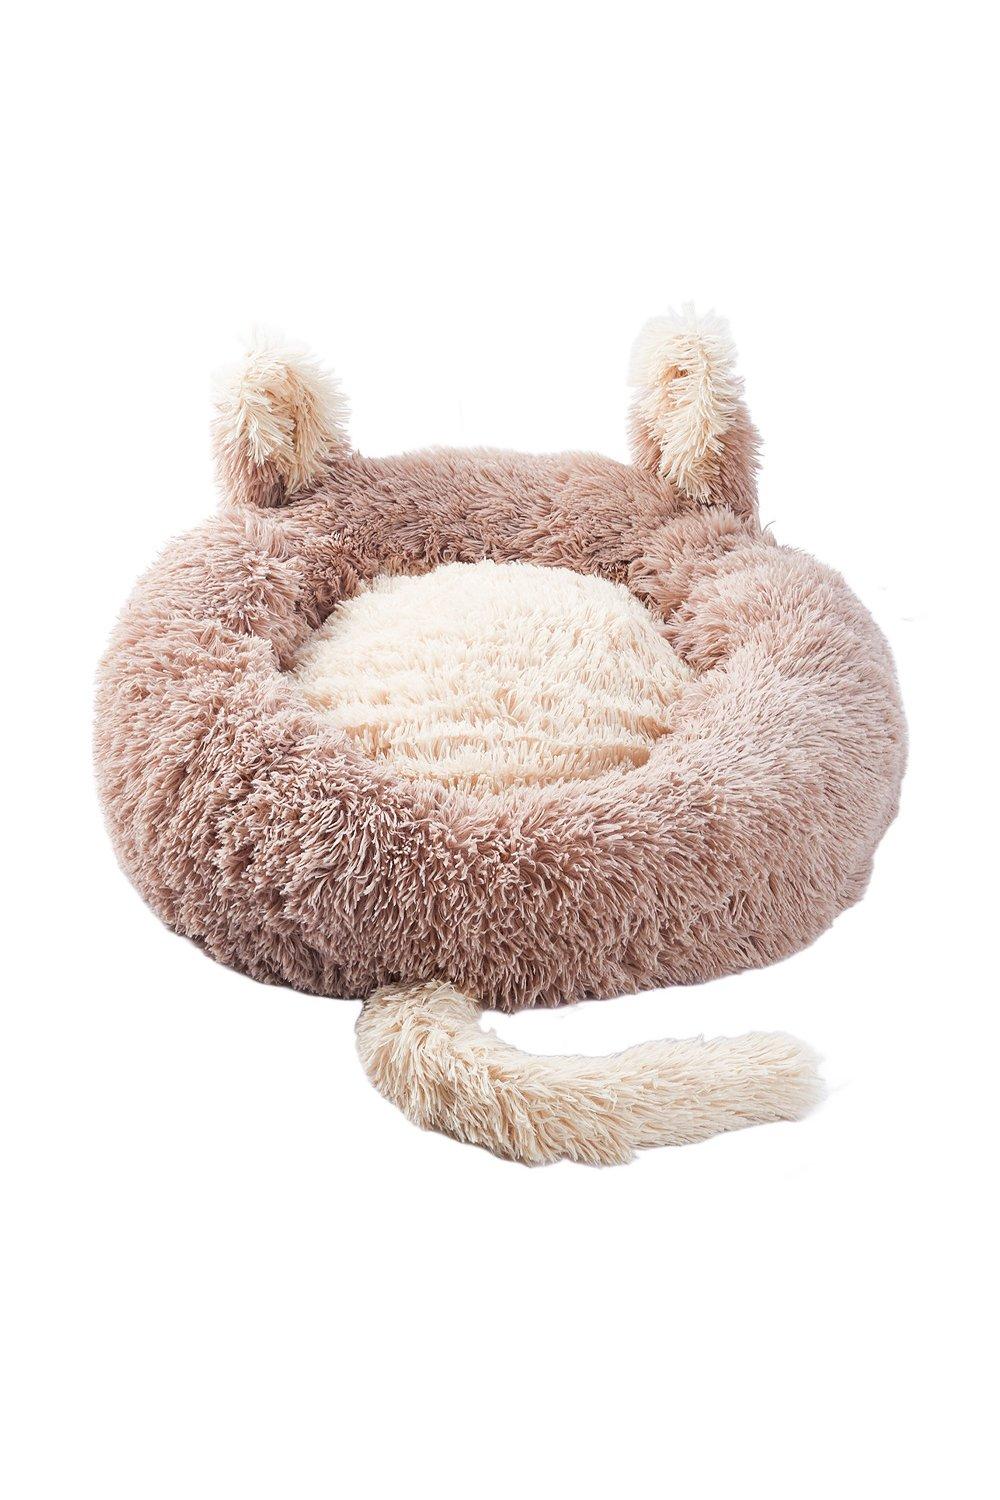 Round Plush Pet Dog Cat Calming Bed with Cute Ears 50x50cm